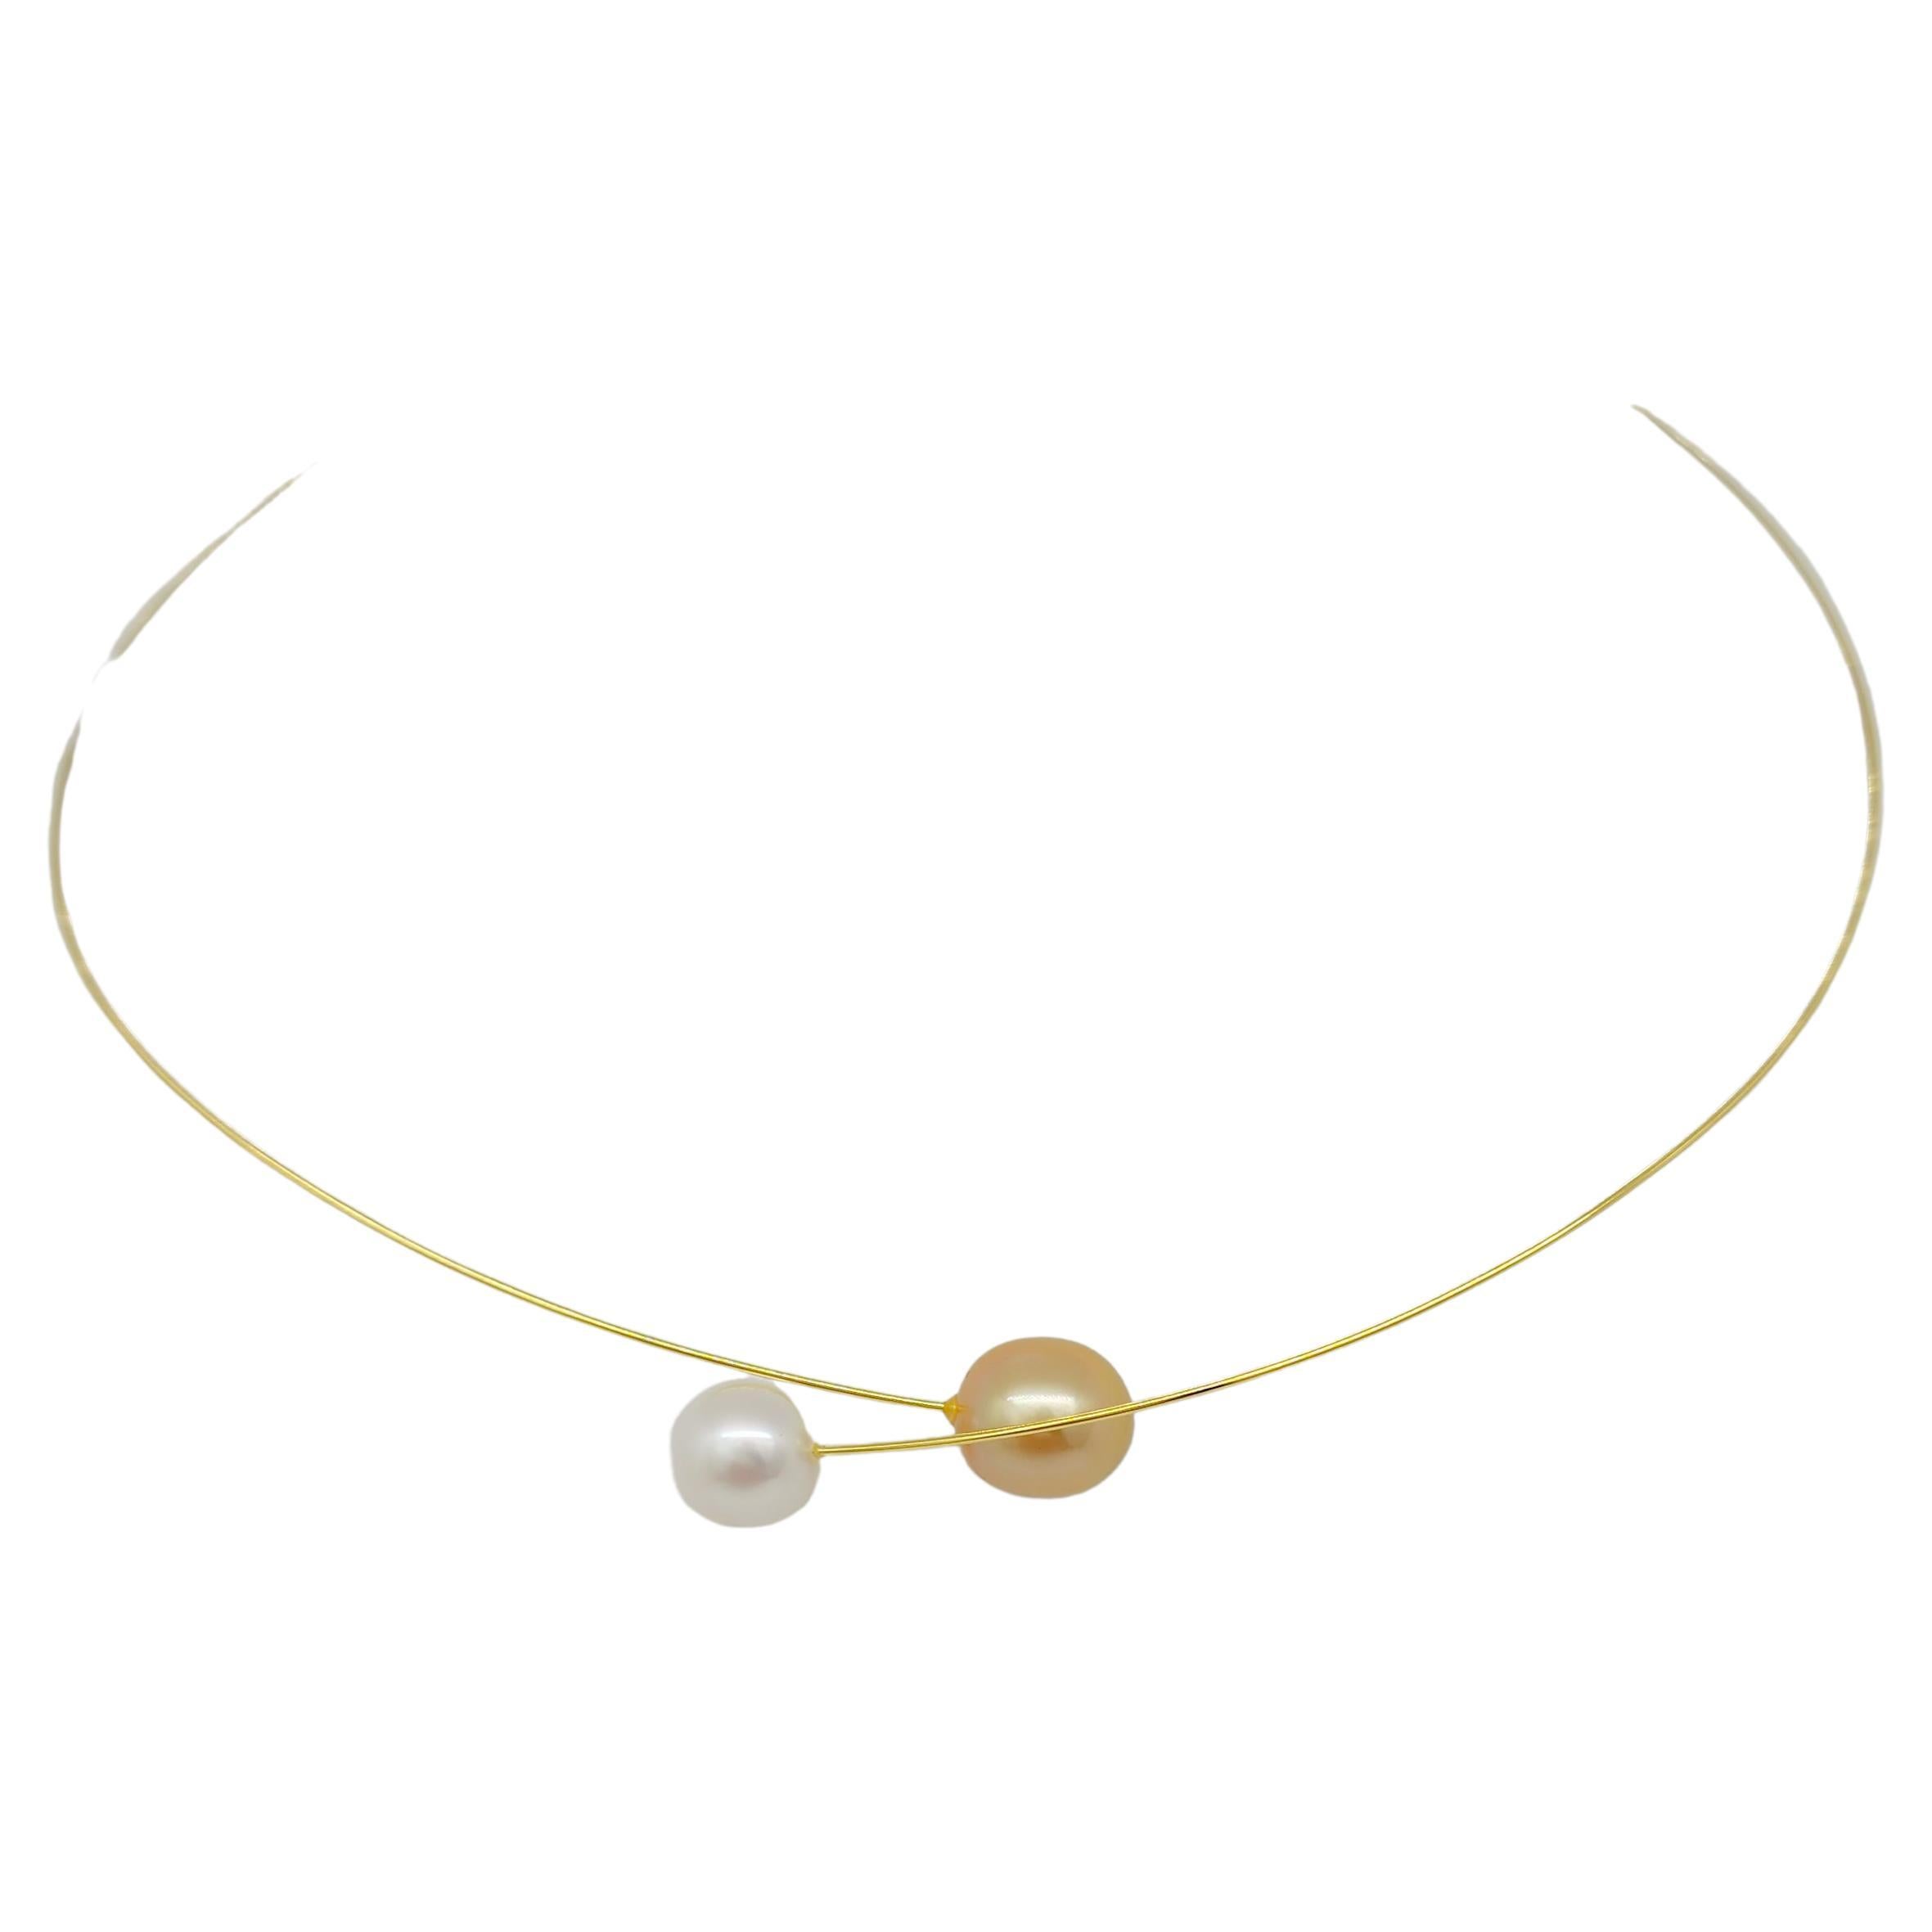 Golden and White Pearl Necklace in 18k Yellow Gold